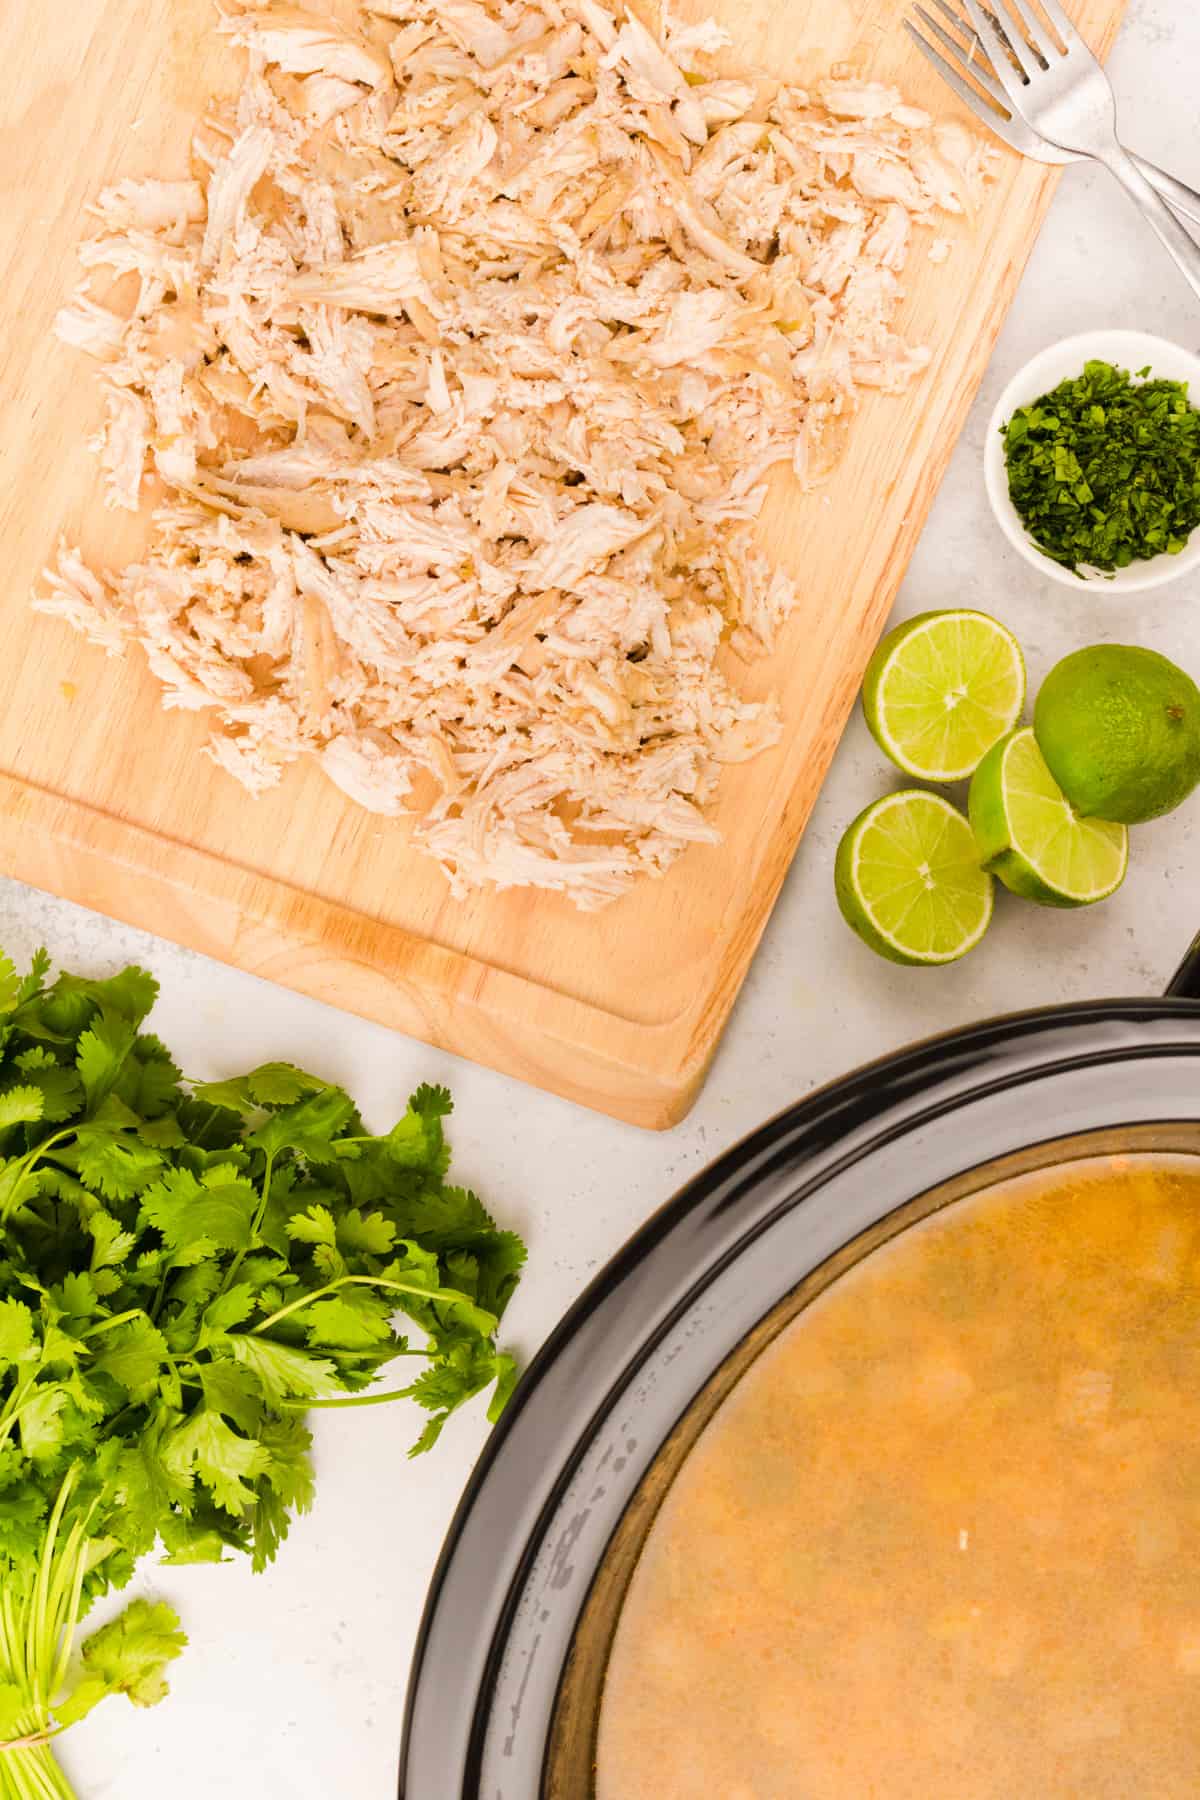 shredded chicken on a wooden cutting board next to a crockpot